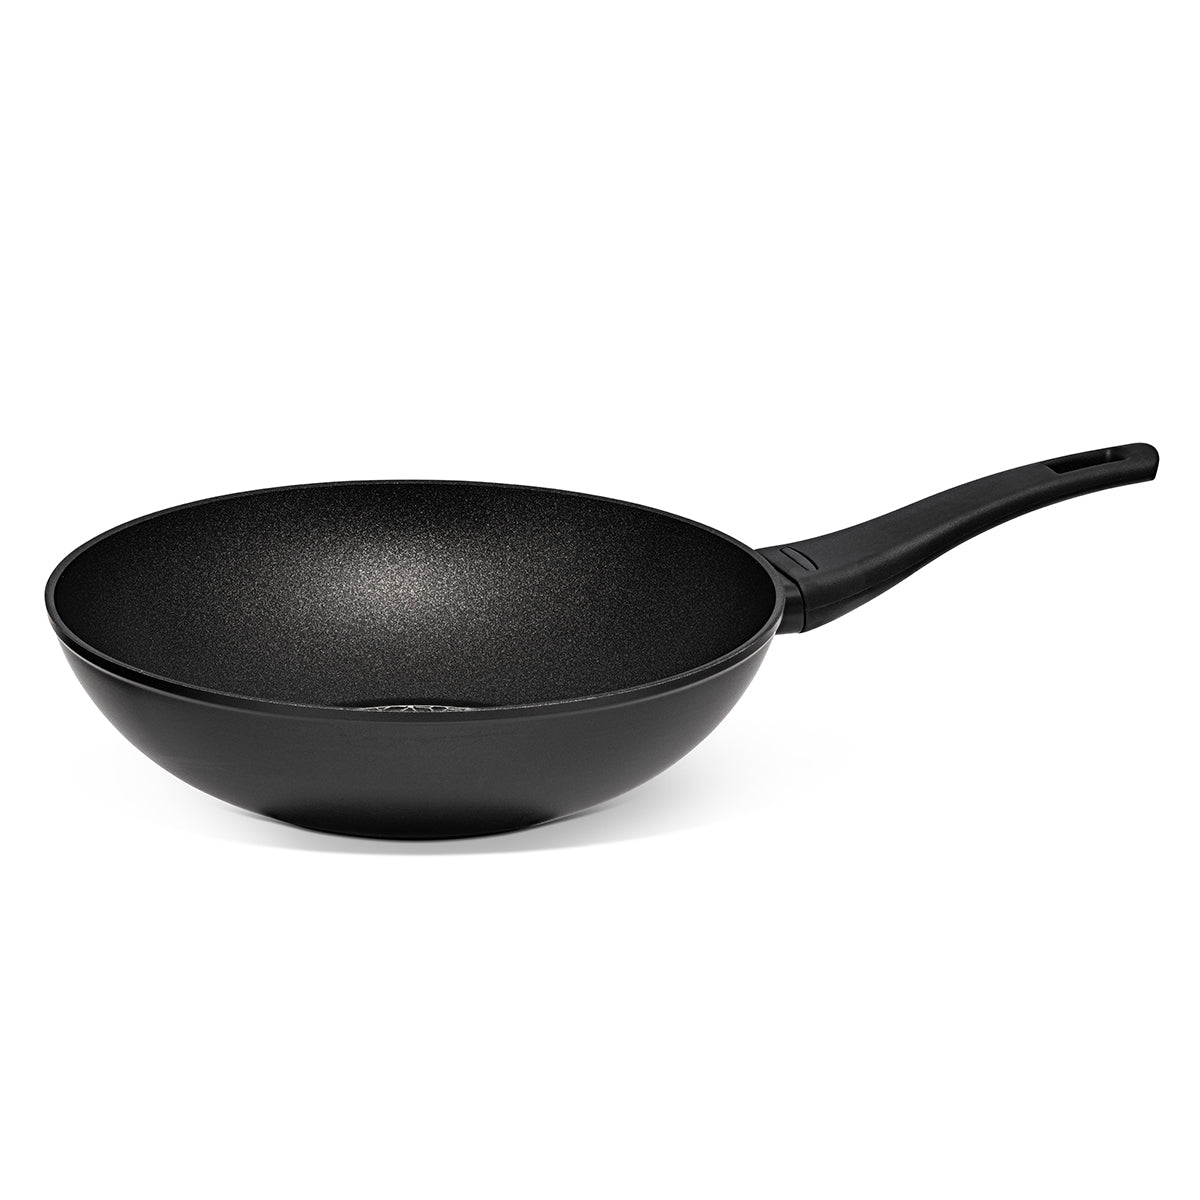 An image of Thermo Smart Stir Fry Wok